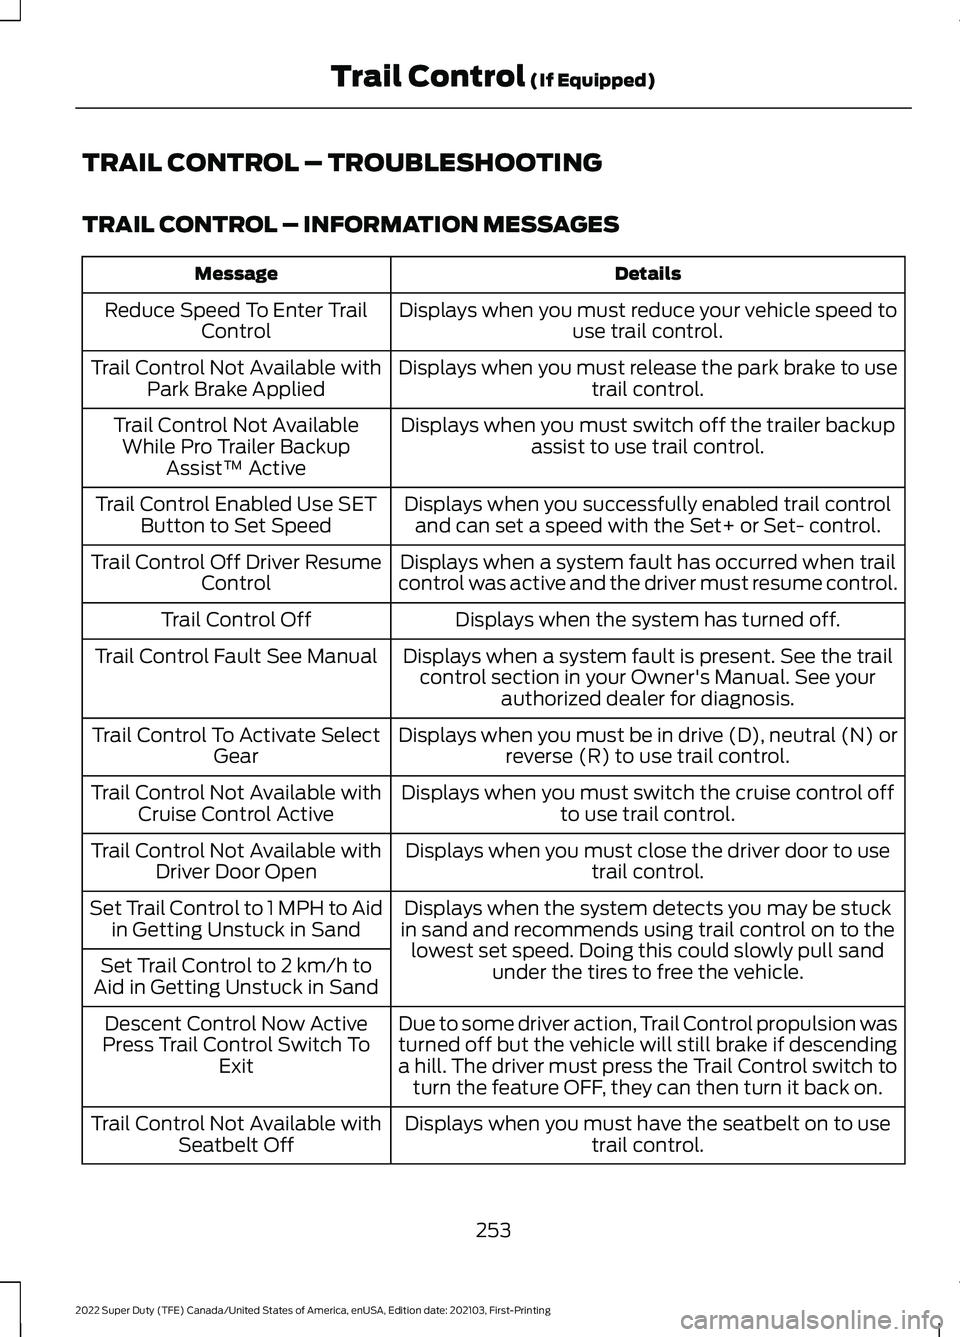 FORD F-350 2022  Owners Manual TRAIL CONTROL – TROUBLESHOOTING
TRAIL CONTROL – INFORMATION MESSAGES
Details
Message
Displays when you must reduce your vehicle speed touse trail control.
Reduce Speed To Enter Trail
Control
Displ